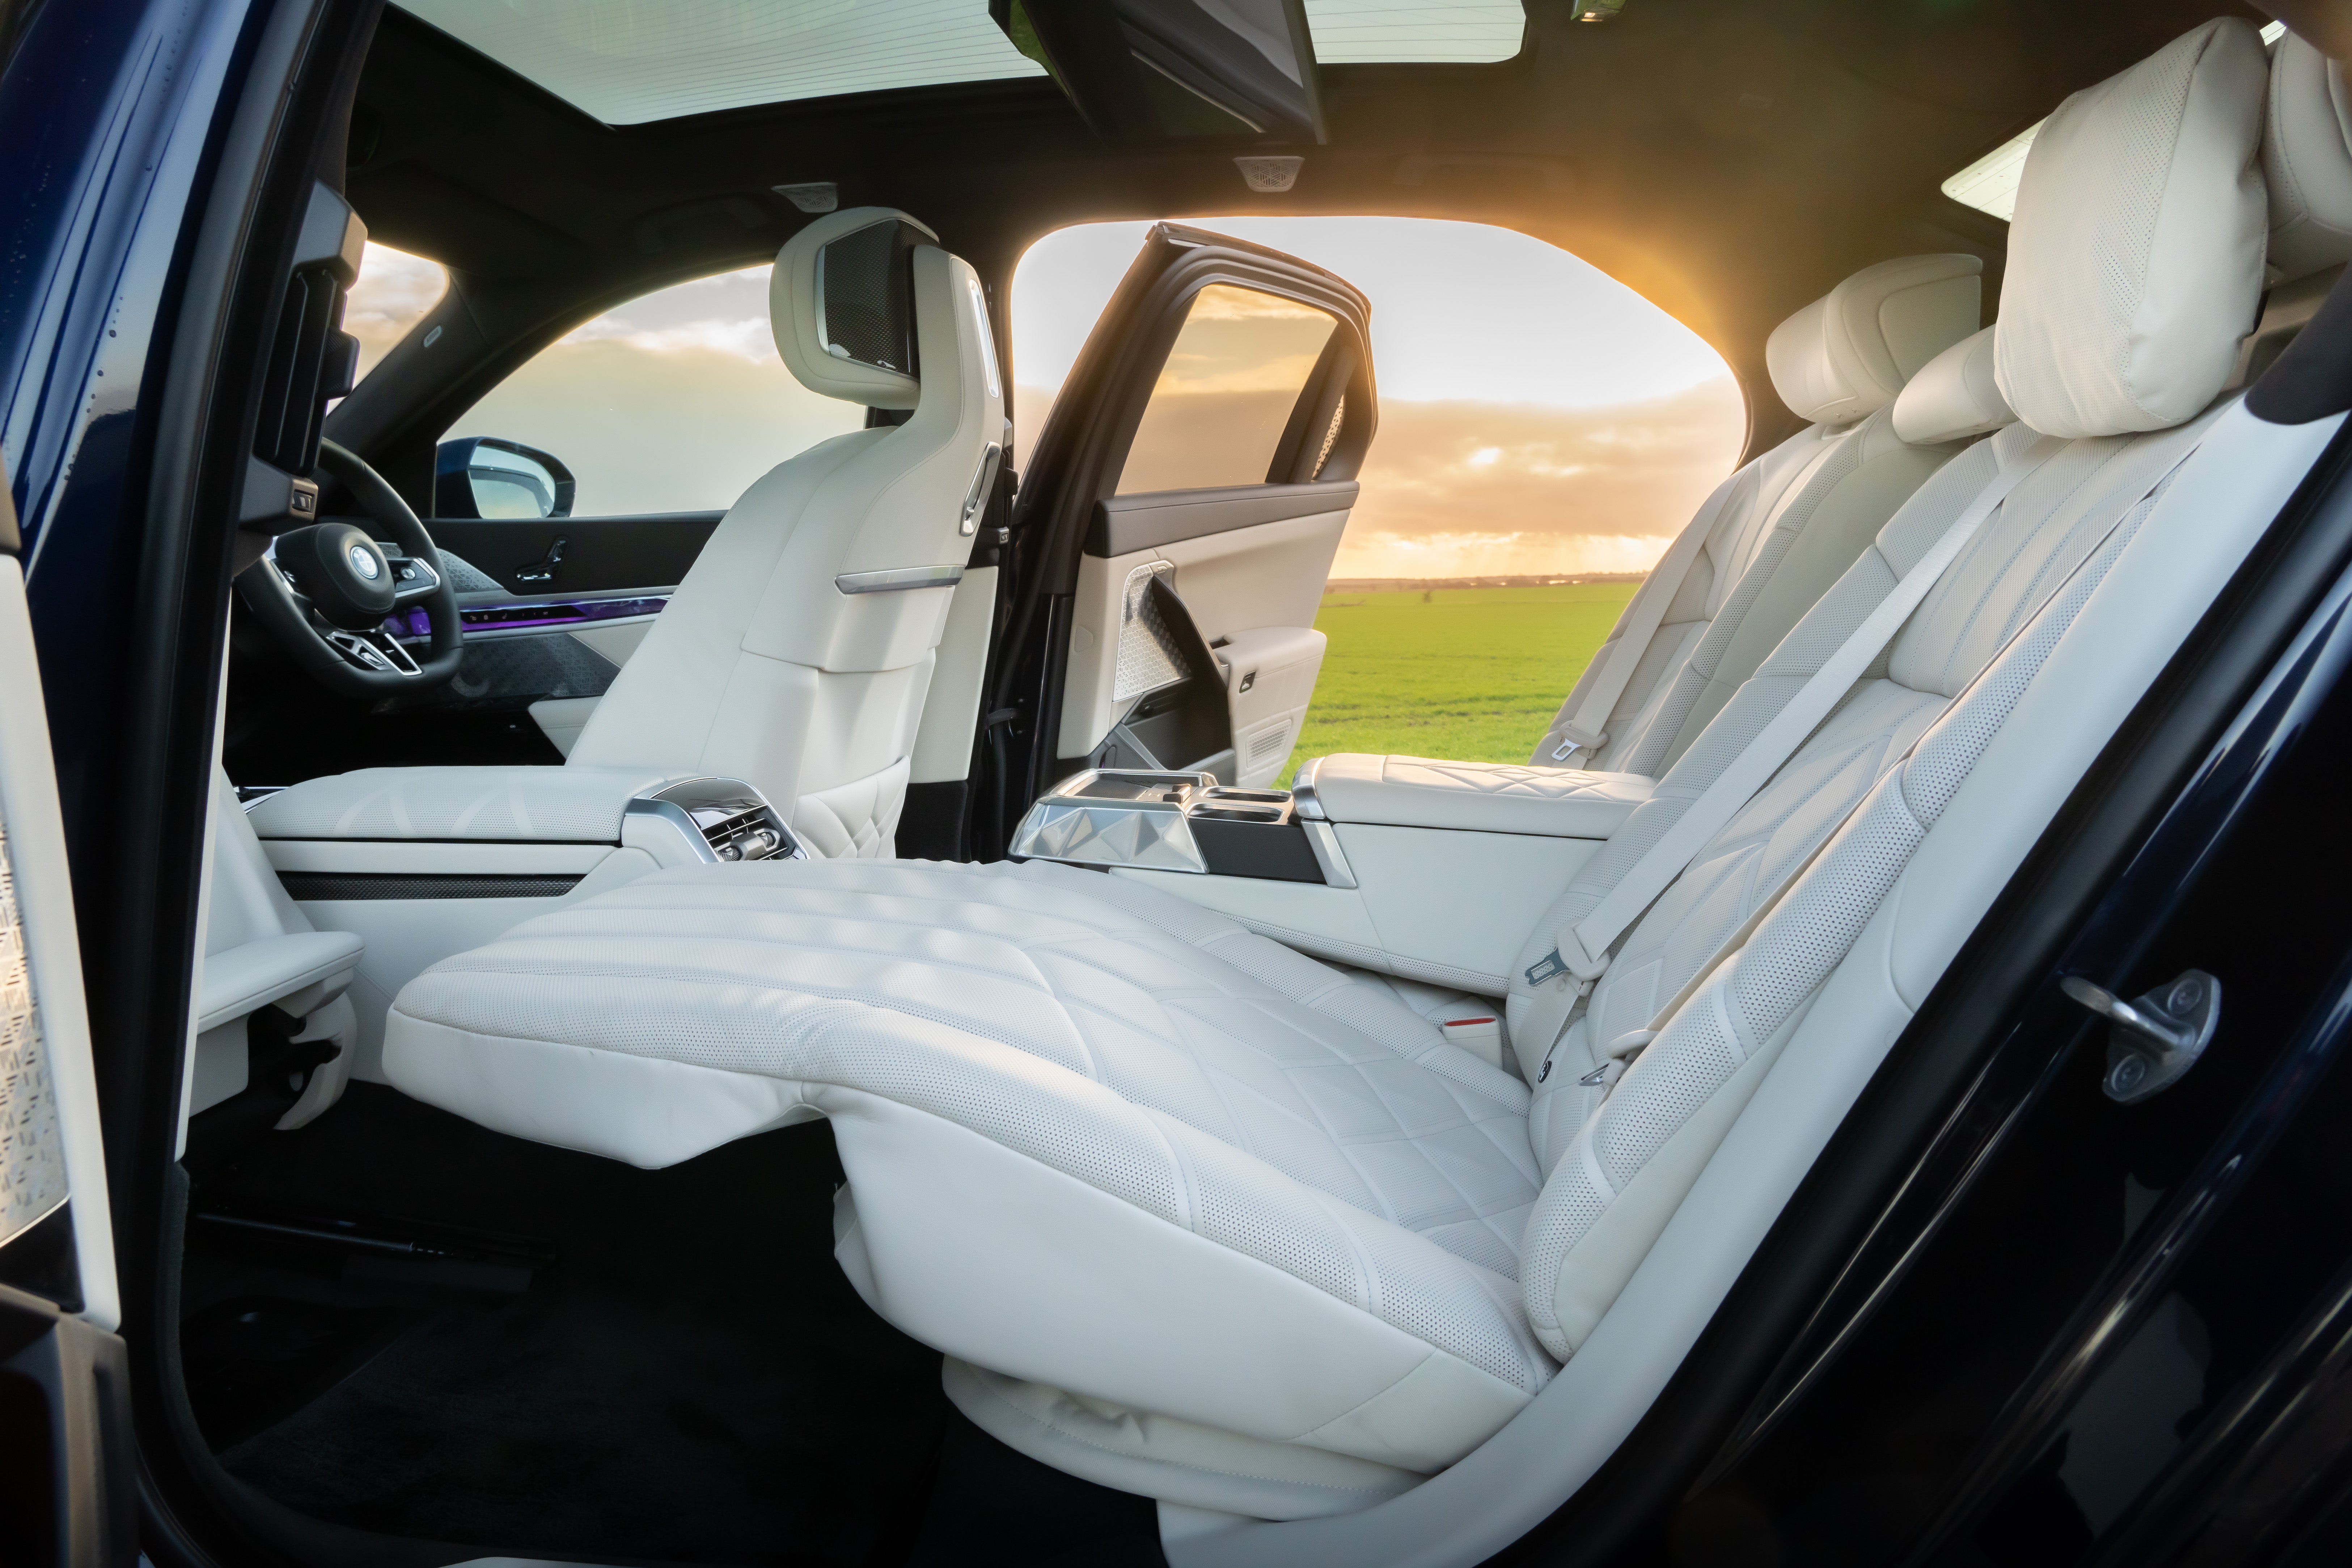 Even better in the back? Recline on ventilated plush leather seats while enjoying an i7 massage